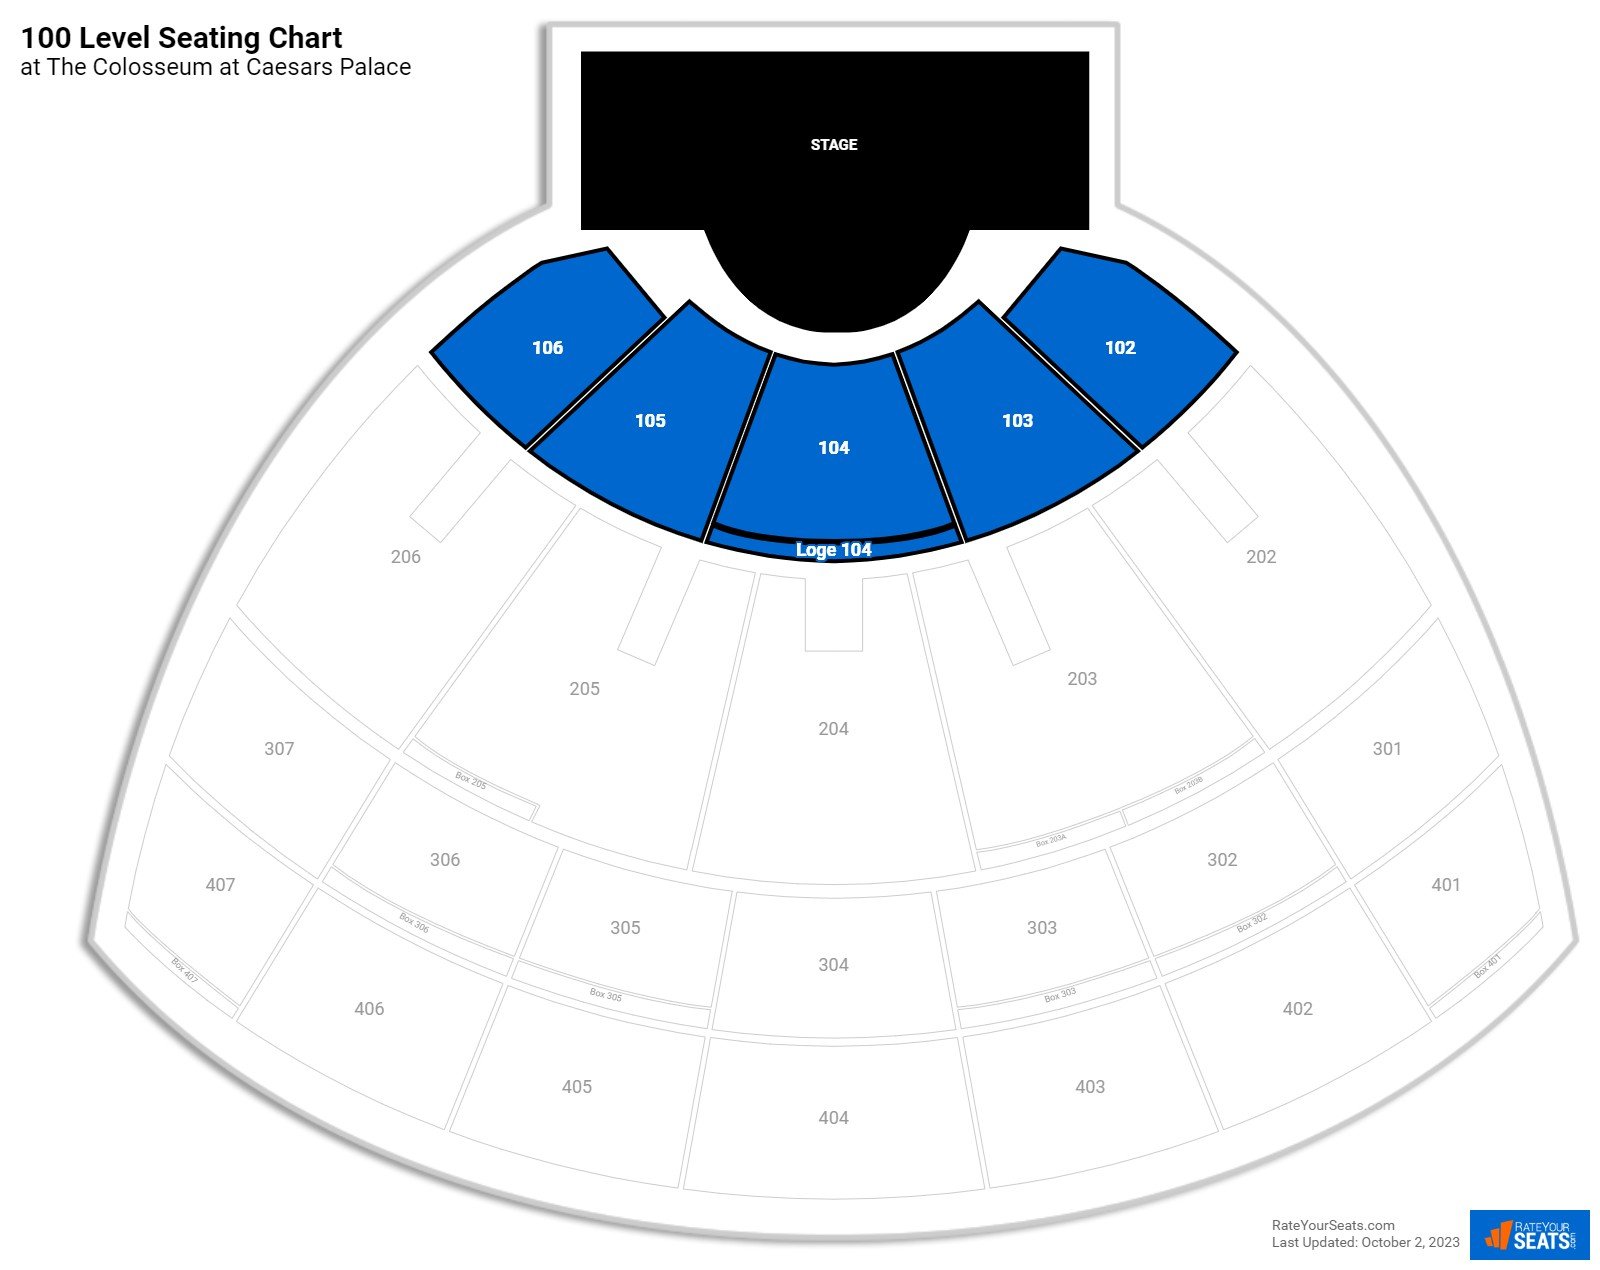 Concert 100 Level Seating Chart at The Colosseum at Caesars Palace